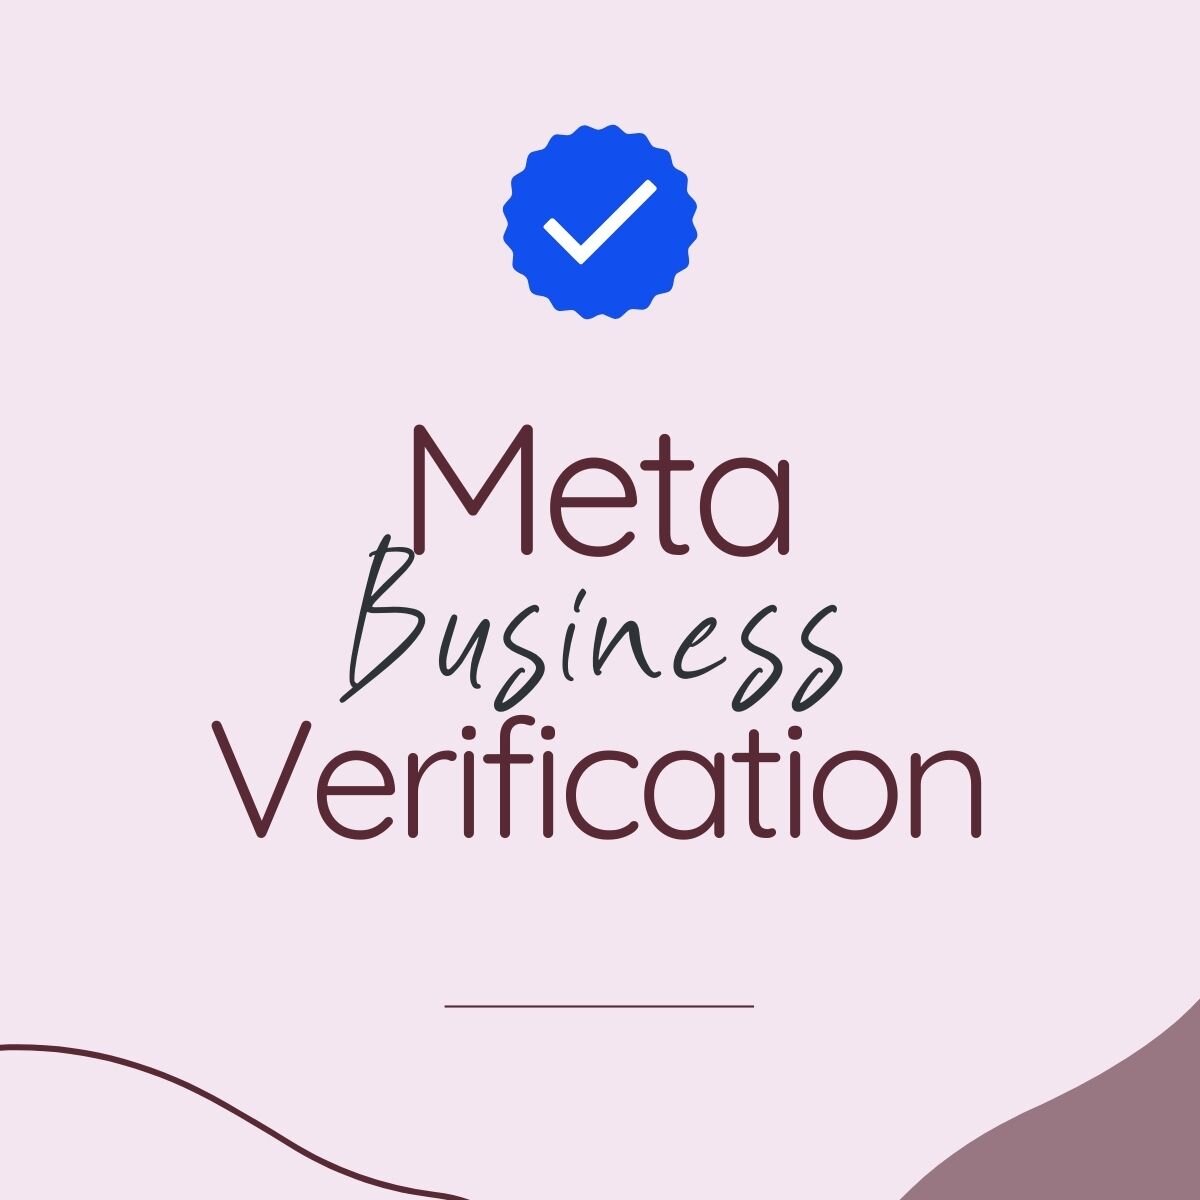 On 19 September, our fav Facebook friend (Zuckerberg) announced that the Meta verified (blue tick) subscriptions will soon be expanding to include business accounts 🎉👍✔️

Previously reserved for individual content creators/influencers, the new Meta